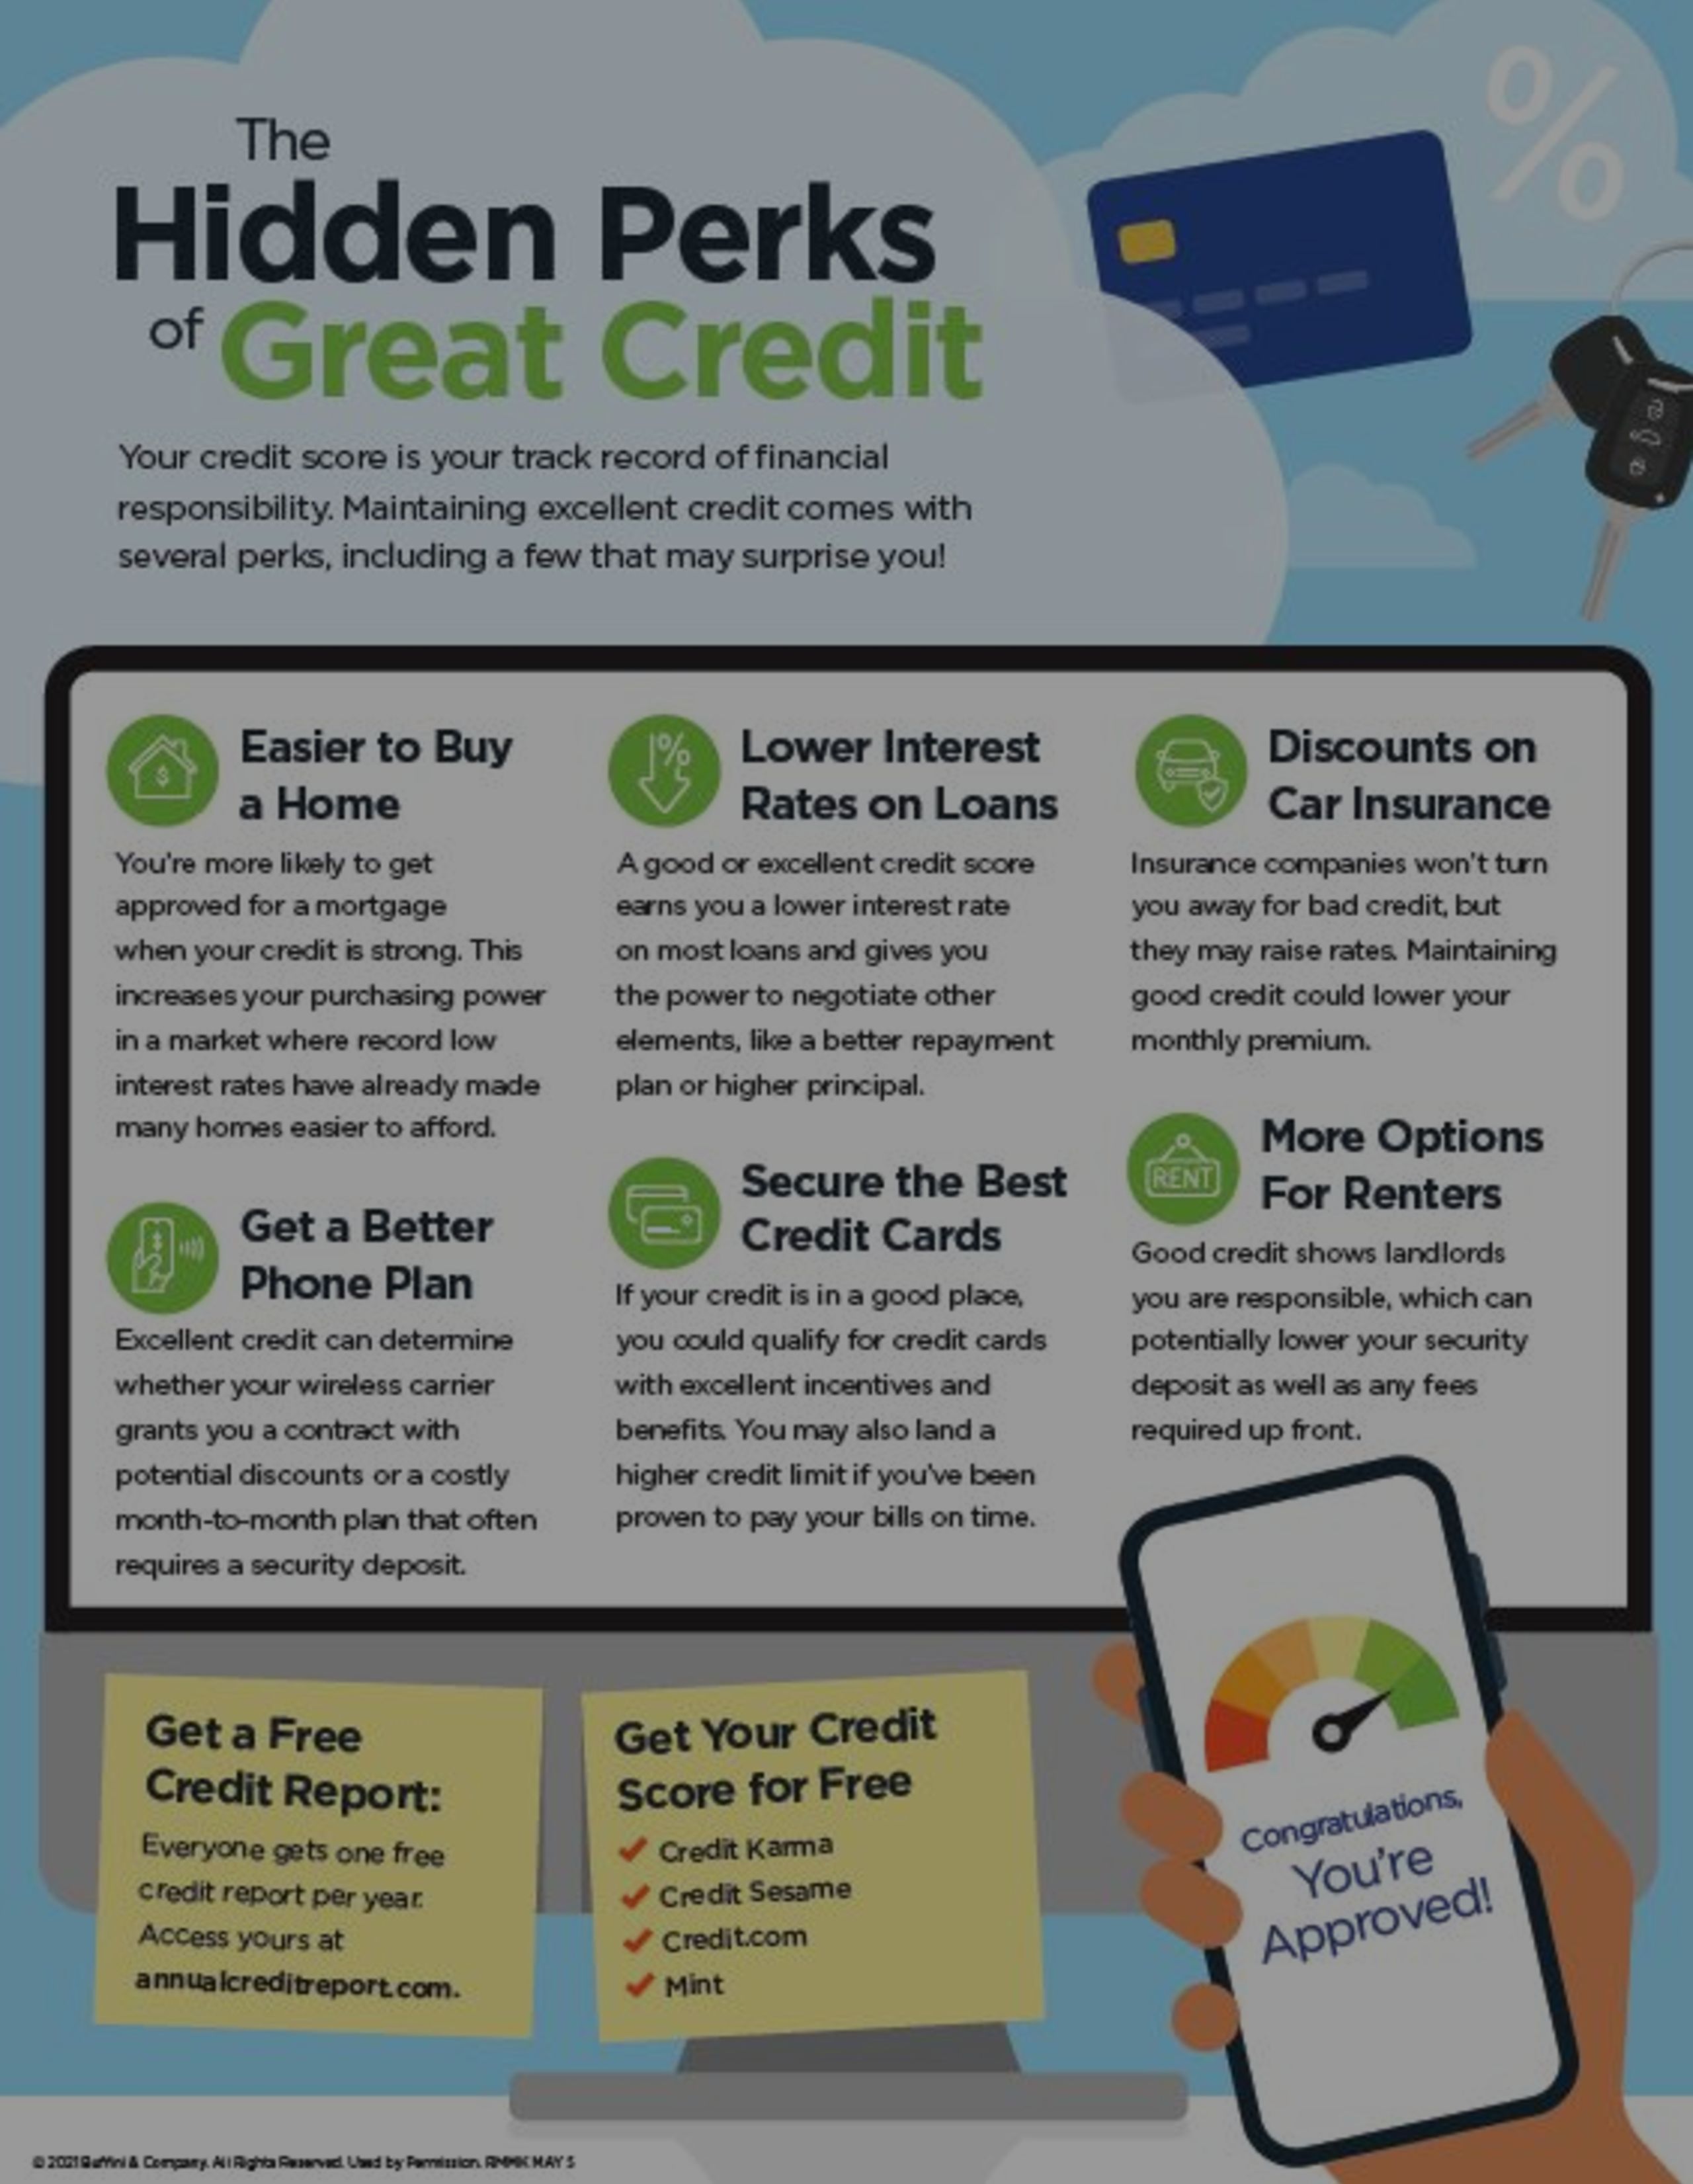 Why have GREAT Credit?